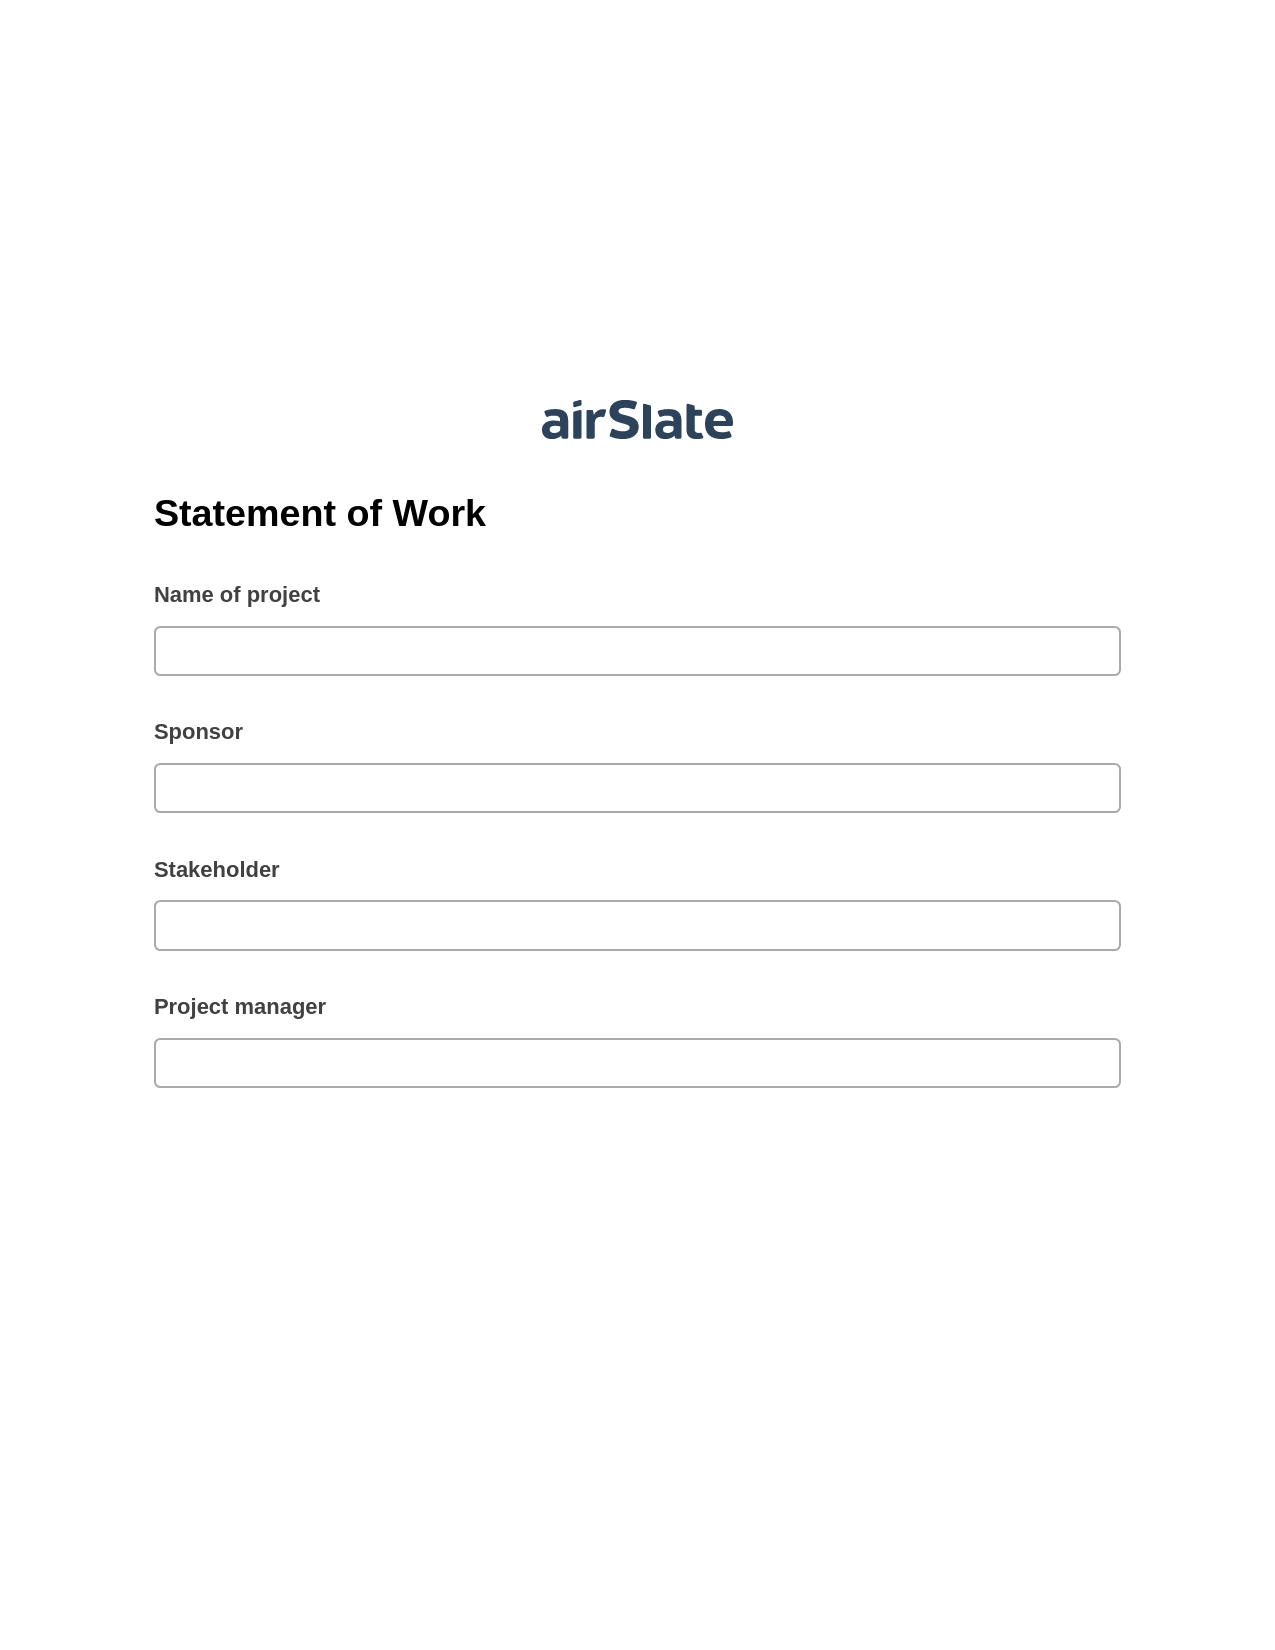 Multirole Statement of Work Pre-fill from Salesforce Record Bot, Assign Slate Name Bot, Export to Formstack Documents Bot